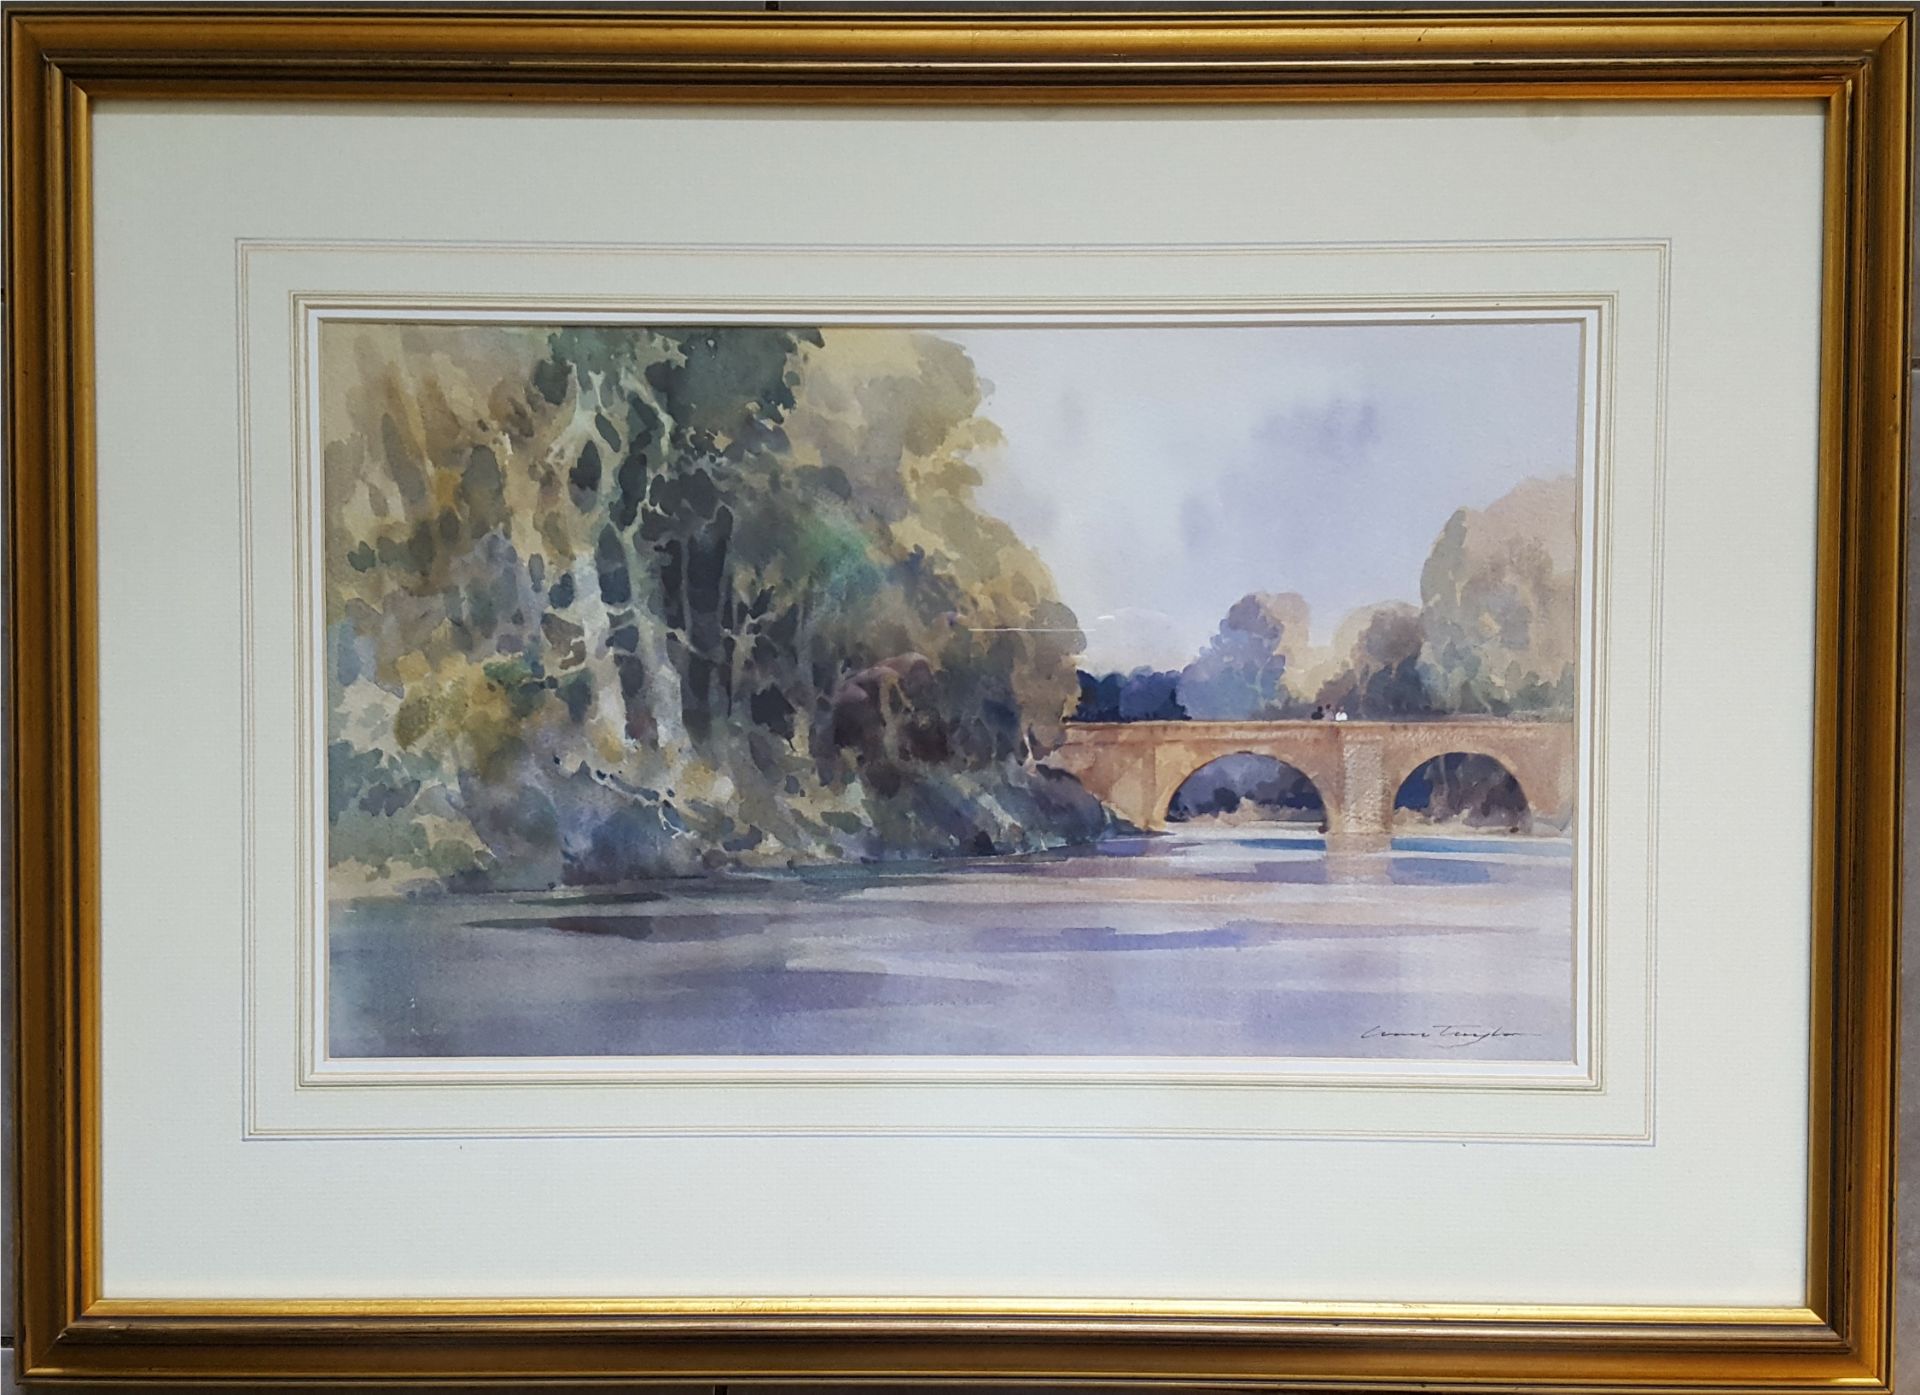 Vintage Retro Original Watercolour Painting "On The Loire" Signed Lower Right Ivan Taylor c1997